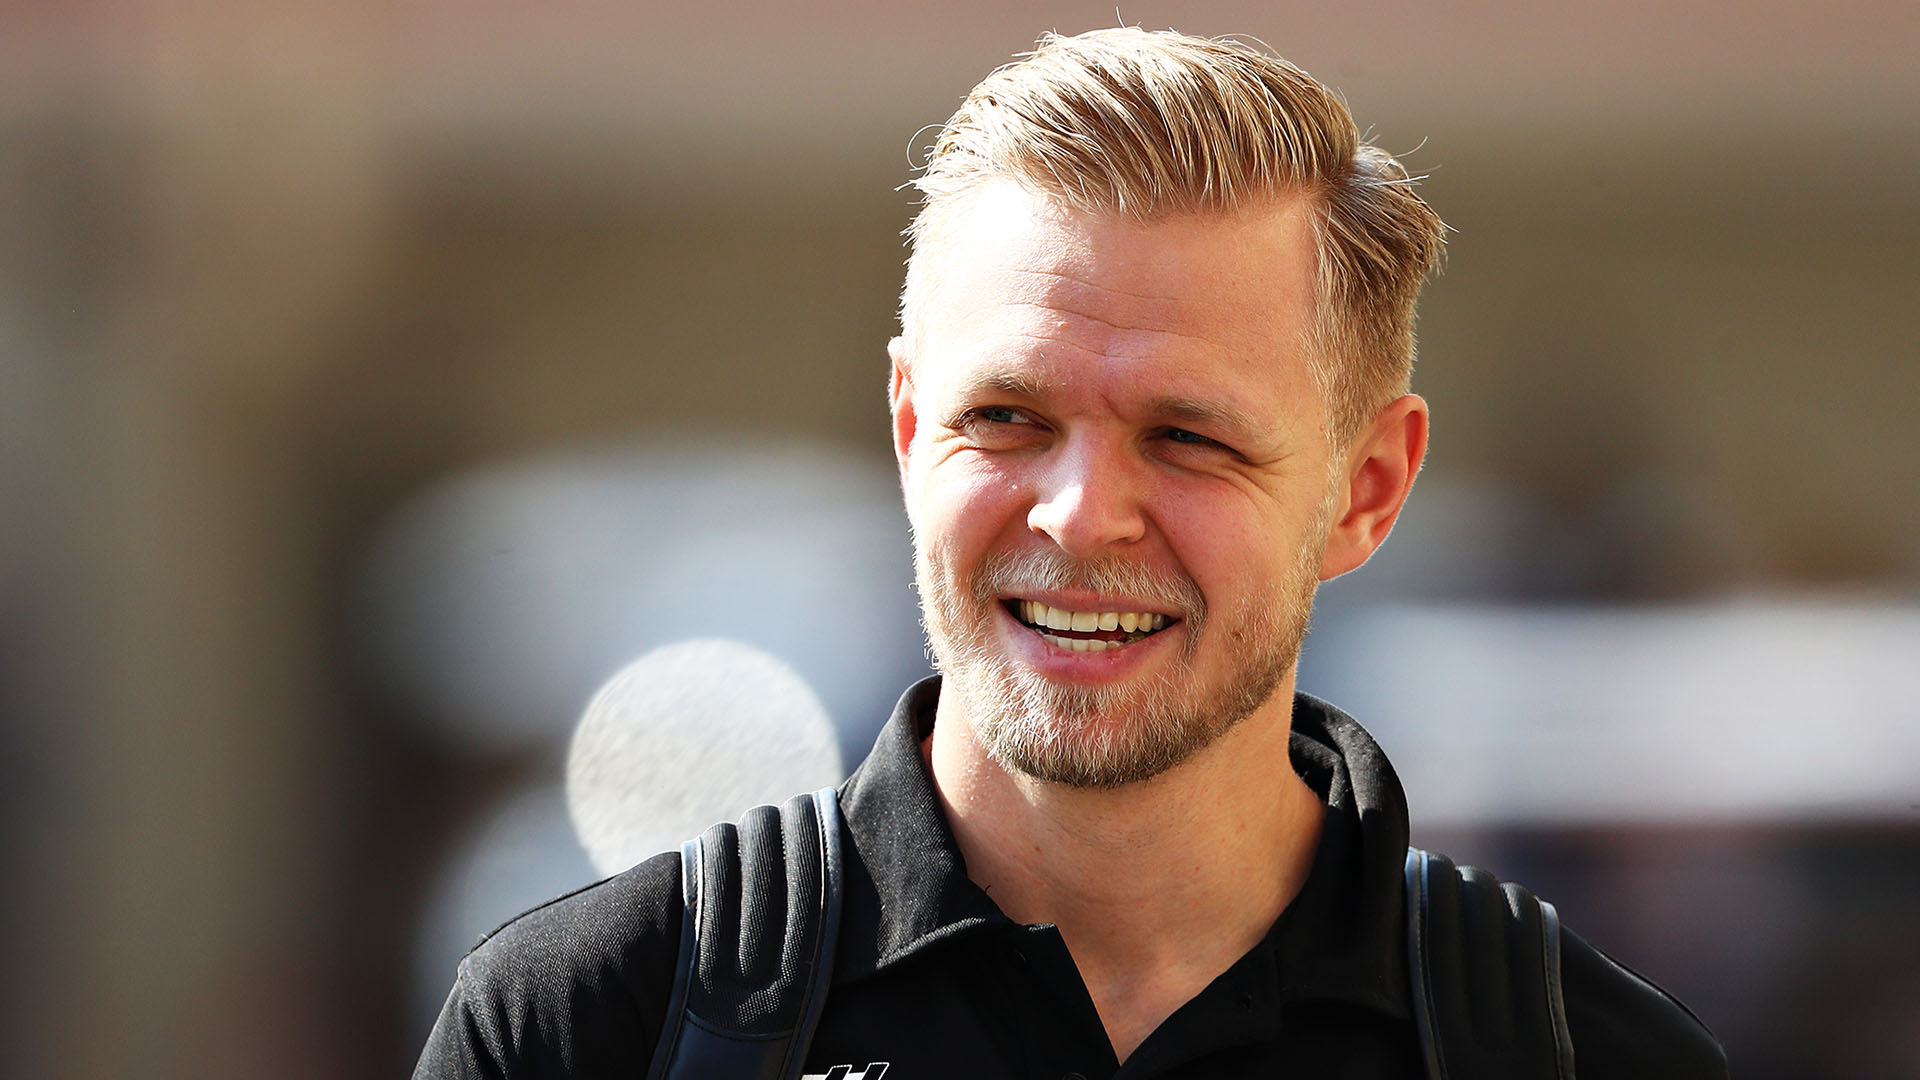 BROKEN: Kevin Magnussen returns to F1 fantastic with Haas in 2022